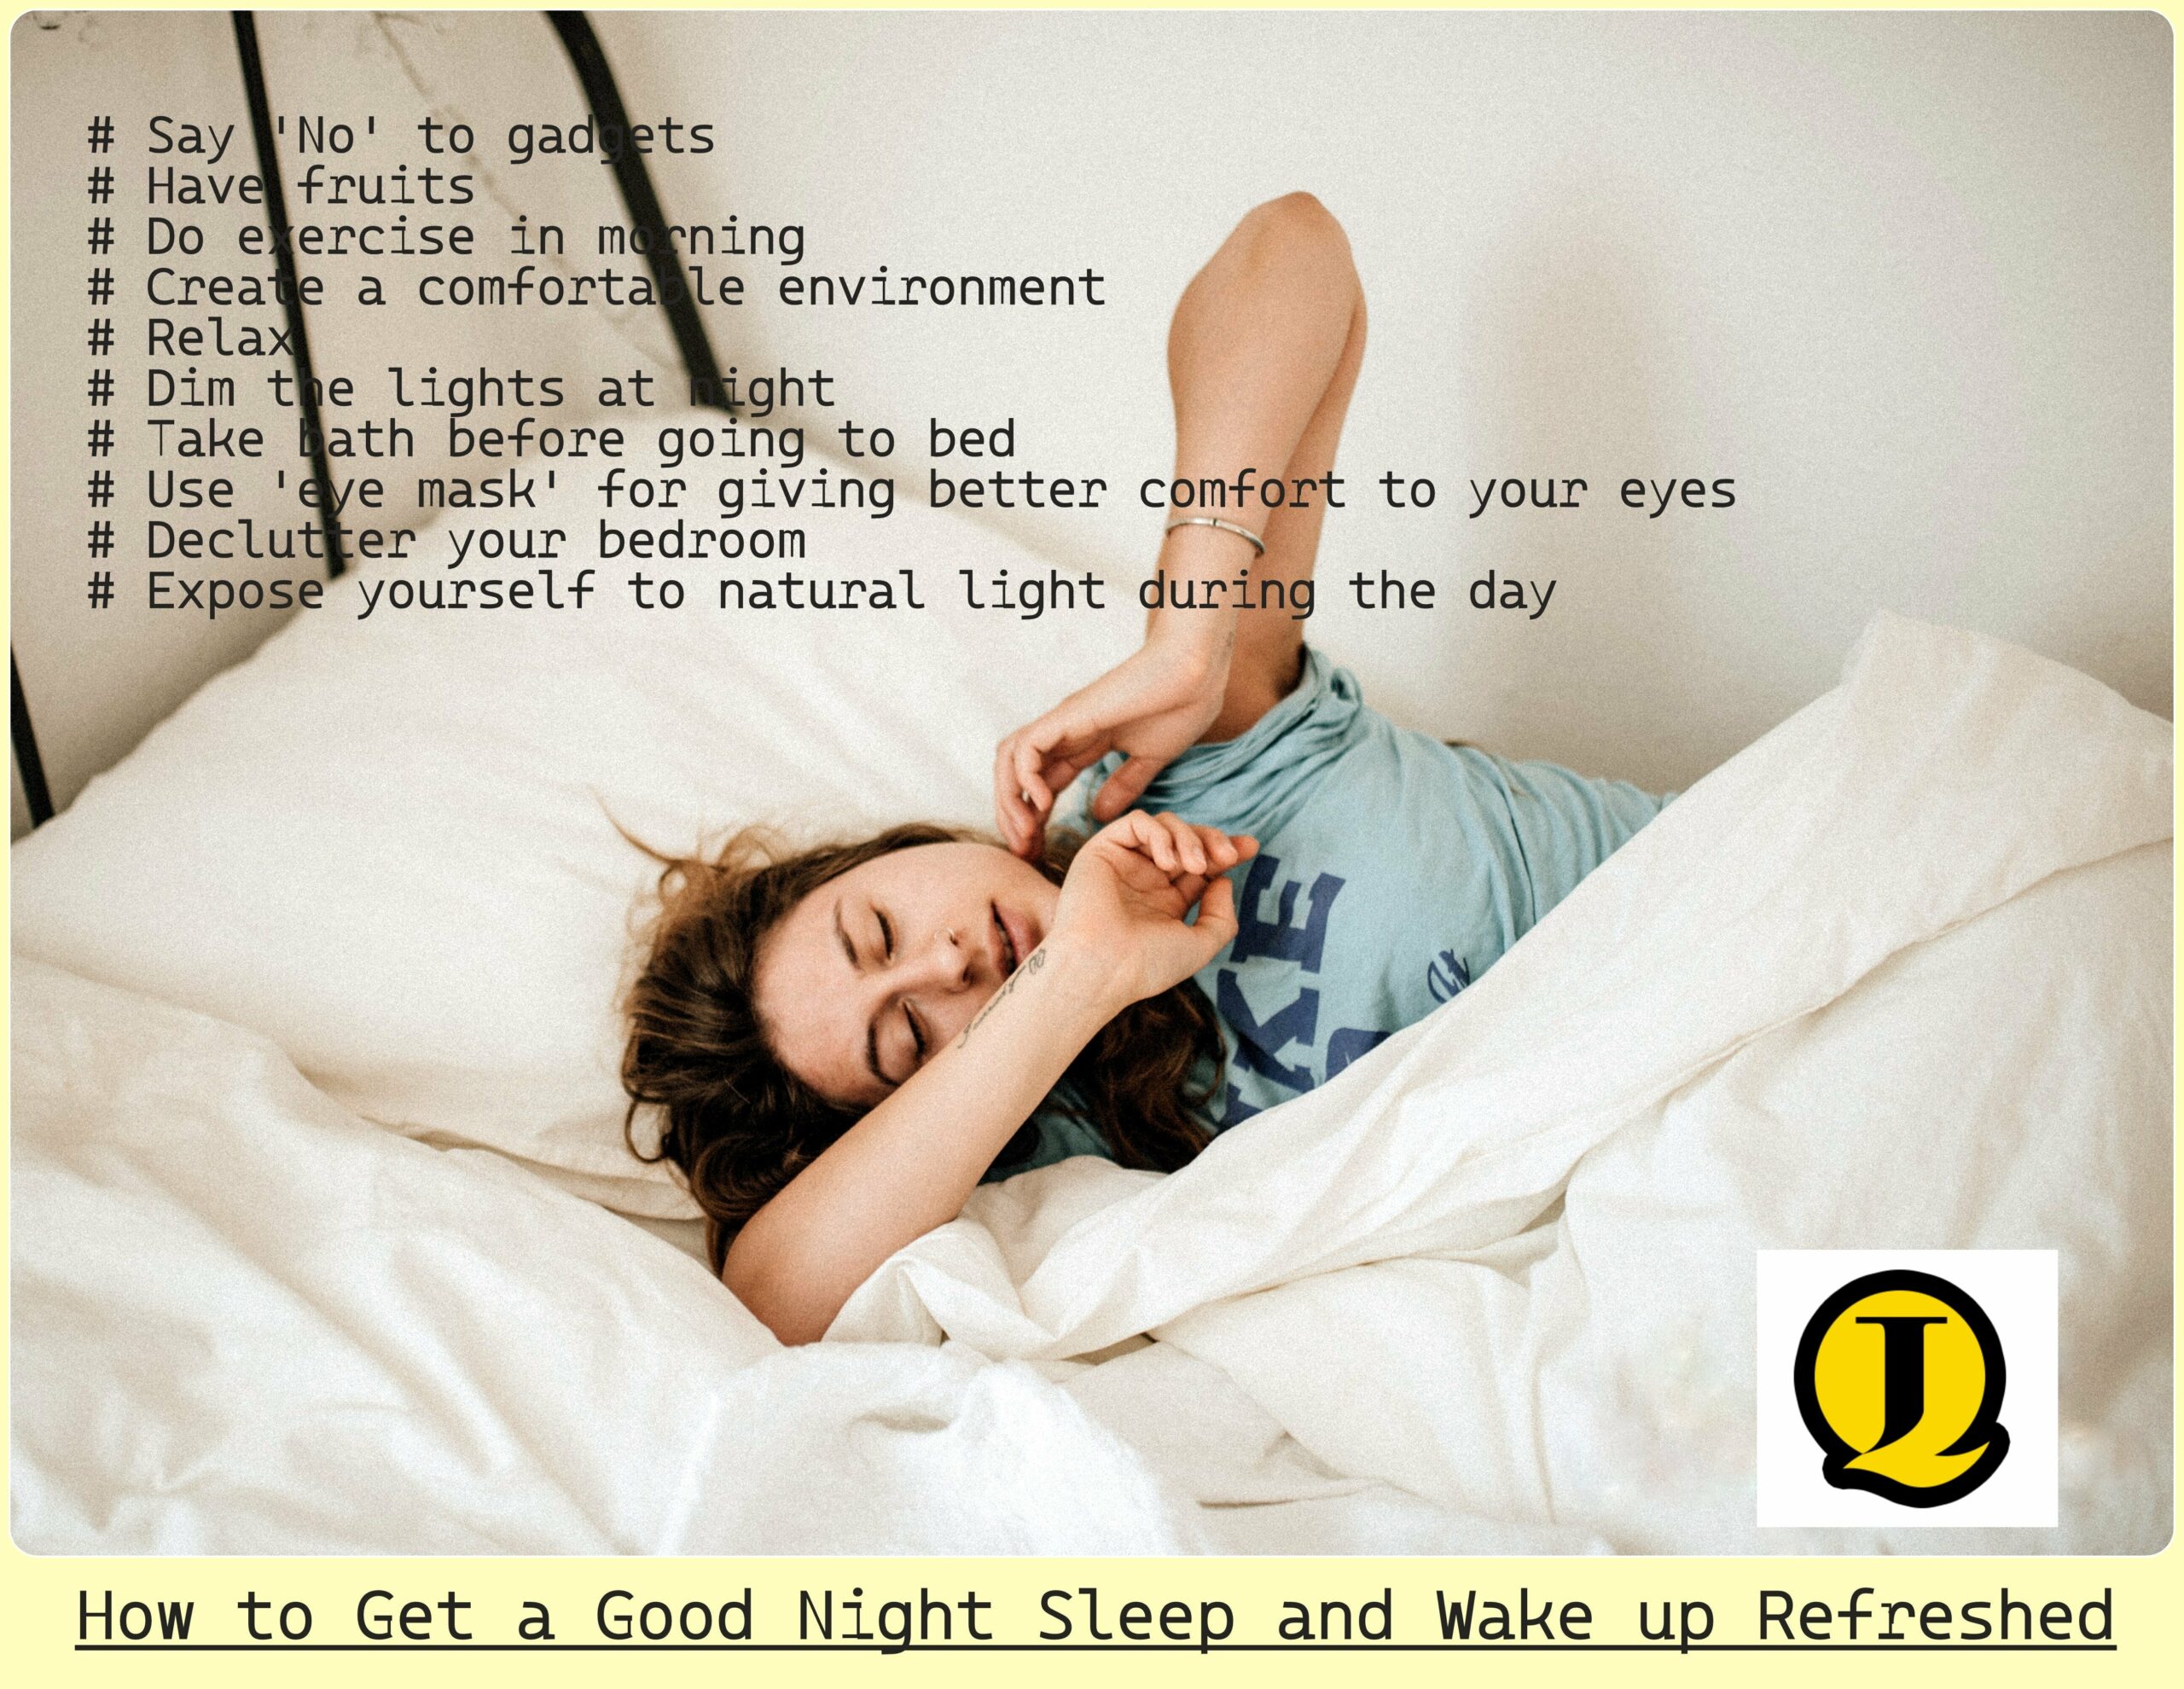 How to Get a Good Night Sleep and Wake up Refreshed